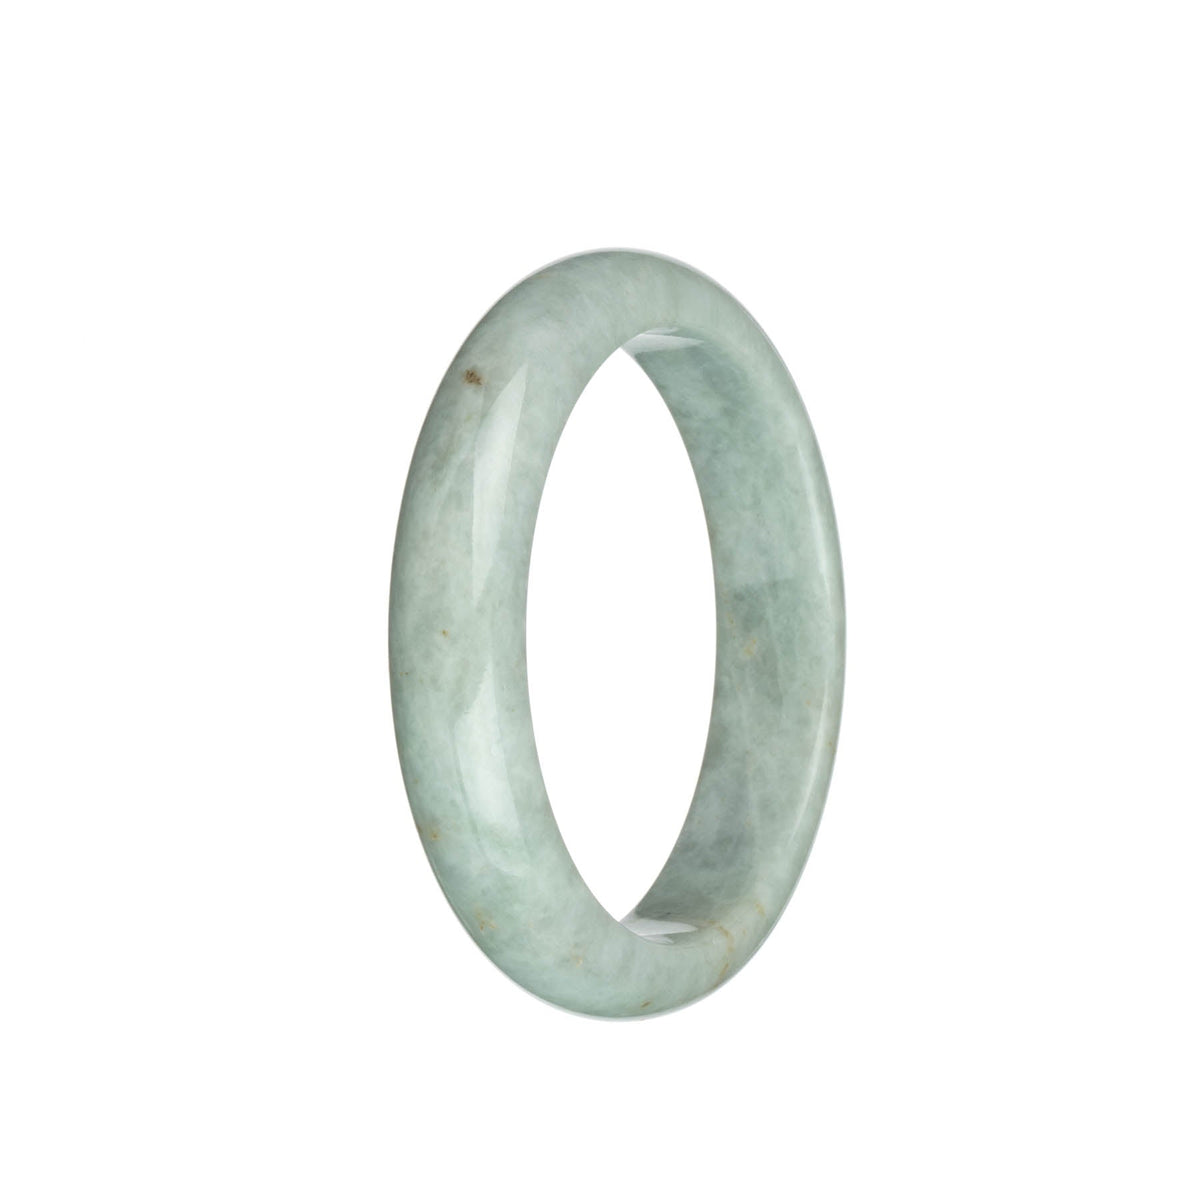 A close-up photo of a light grey jadeite bracelet with a half moon design. The bracelet is made of genuine, untreated jadeite and has a diameter of 59mm. The brand name "MAYS™" is also mentioned.